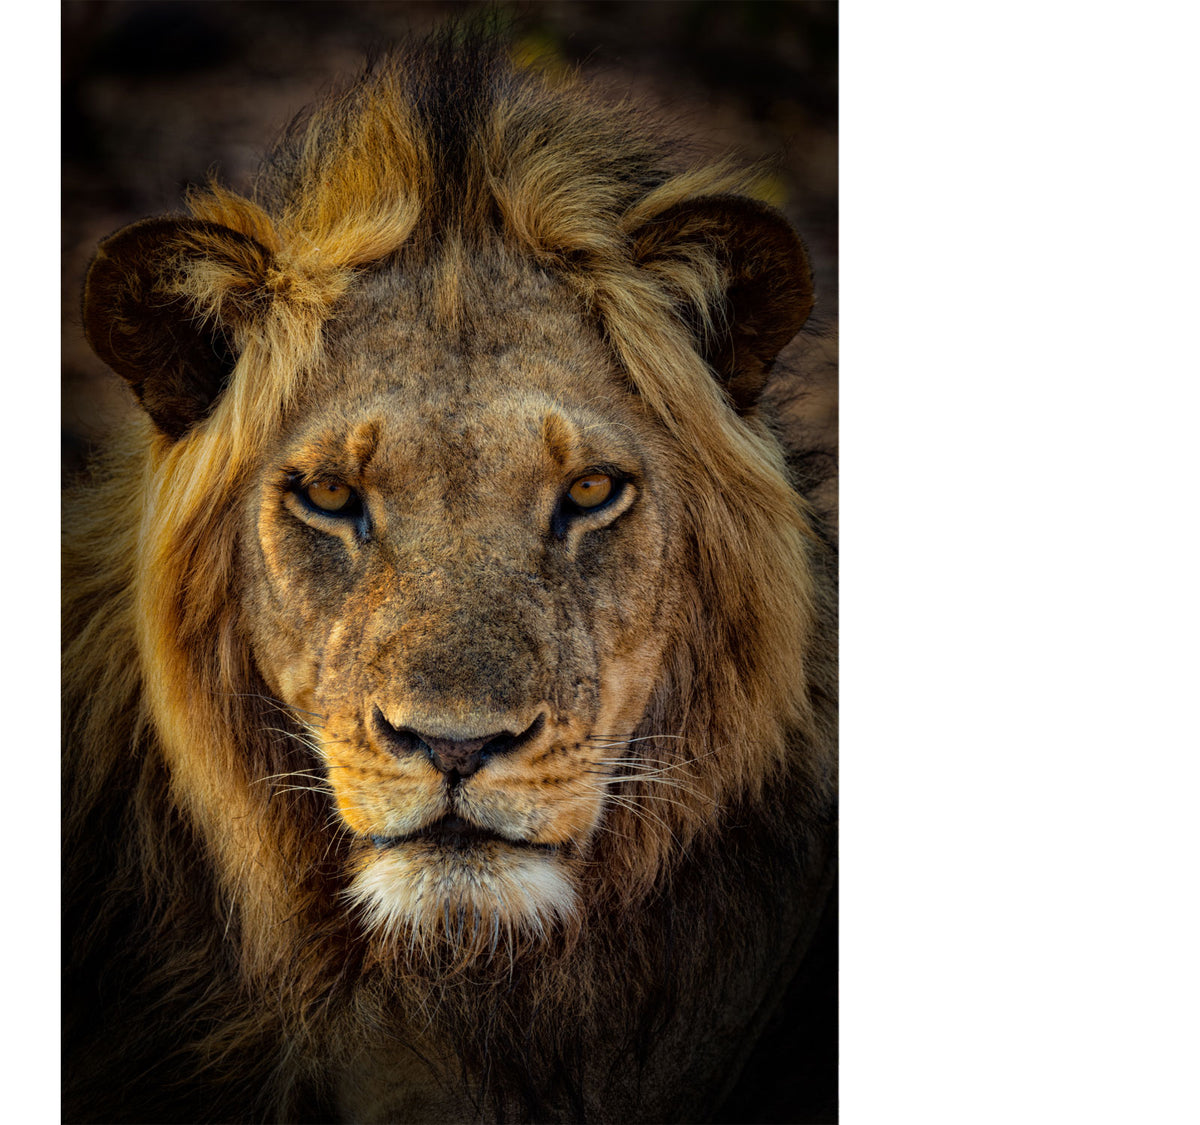 Photograph from Peter Lik of a Lion's portrait staring straight at the viewer 